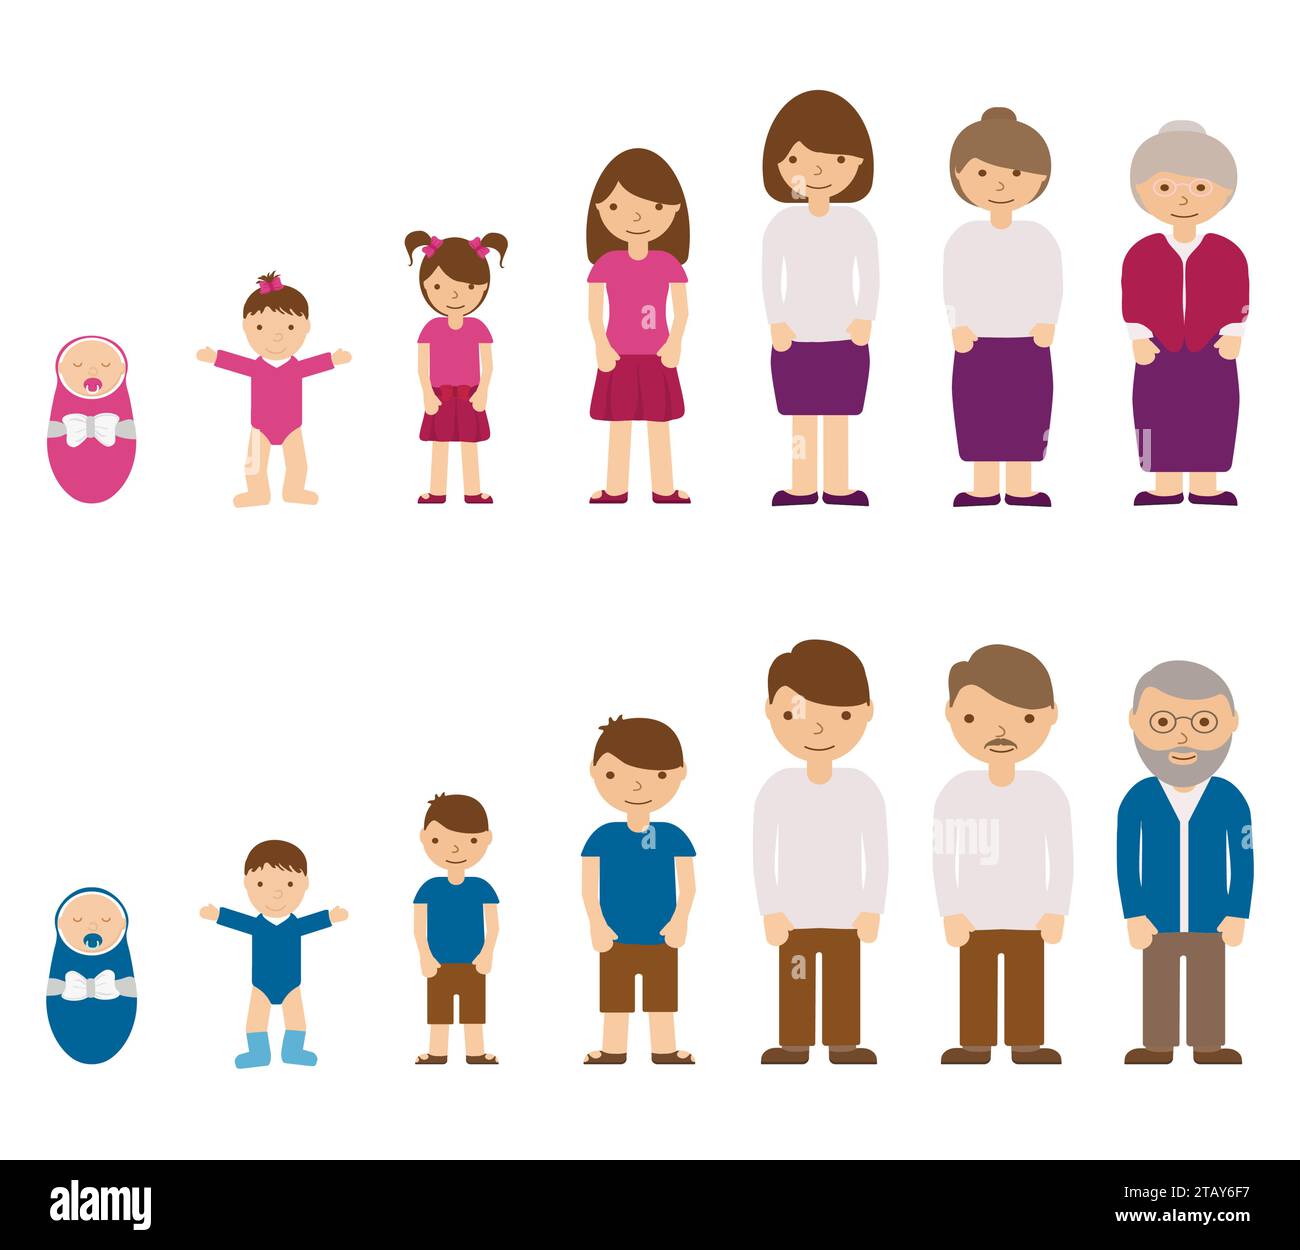 Aging concept of male and female characters - baby, child, teenager ...